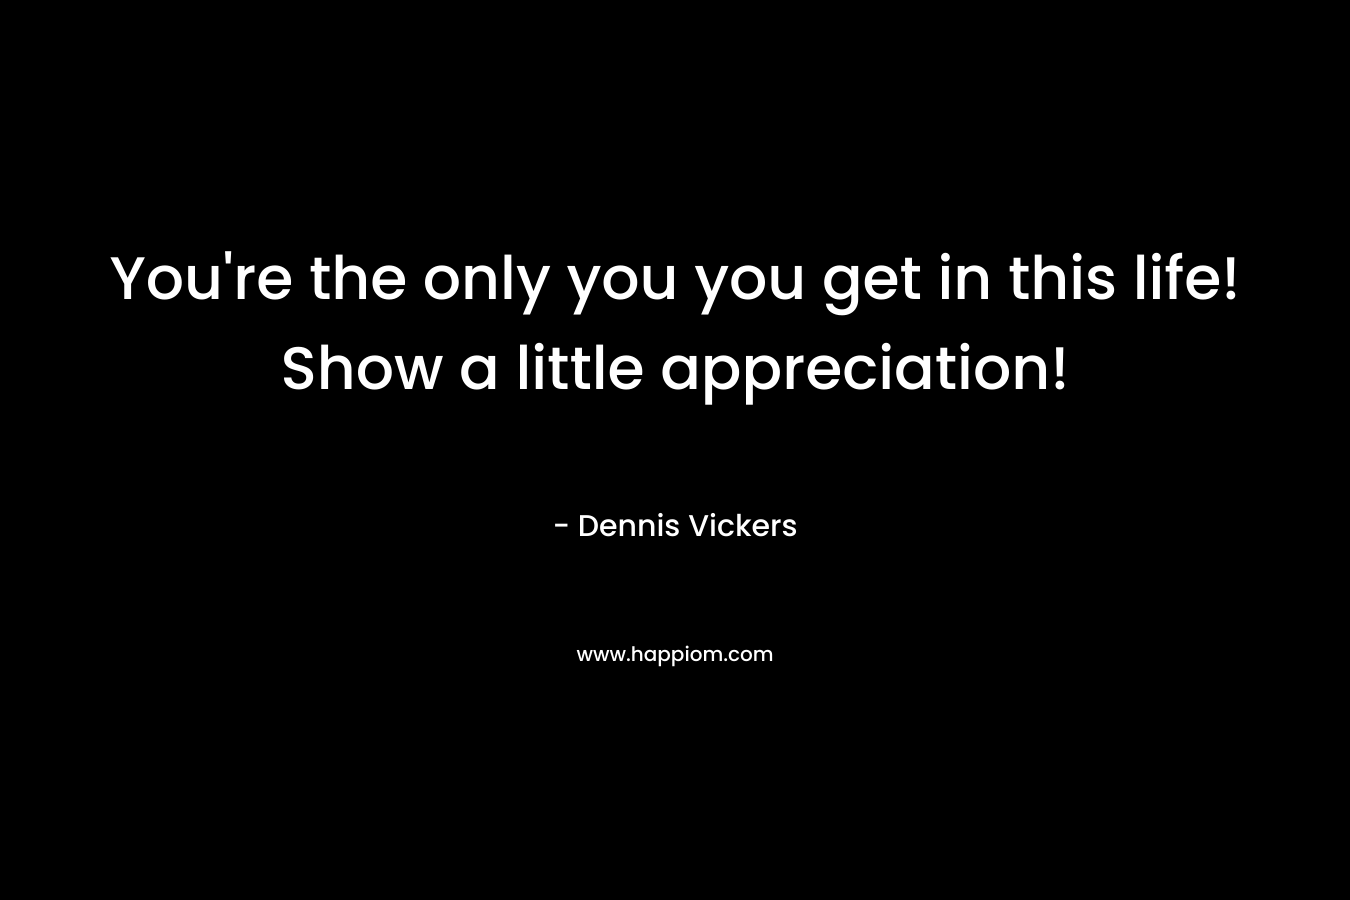 You're the only you you get in this life! Show a little appreciation!